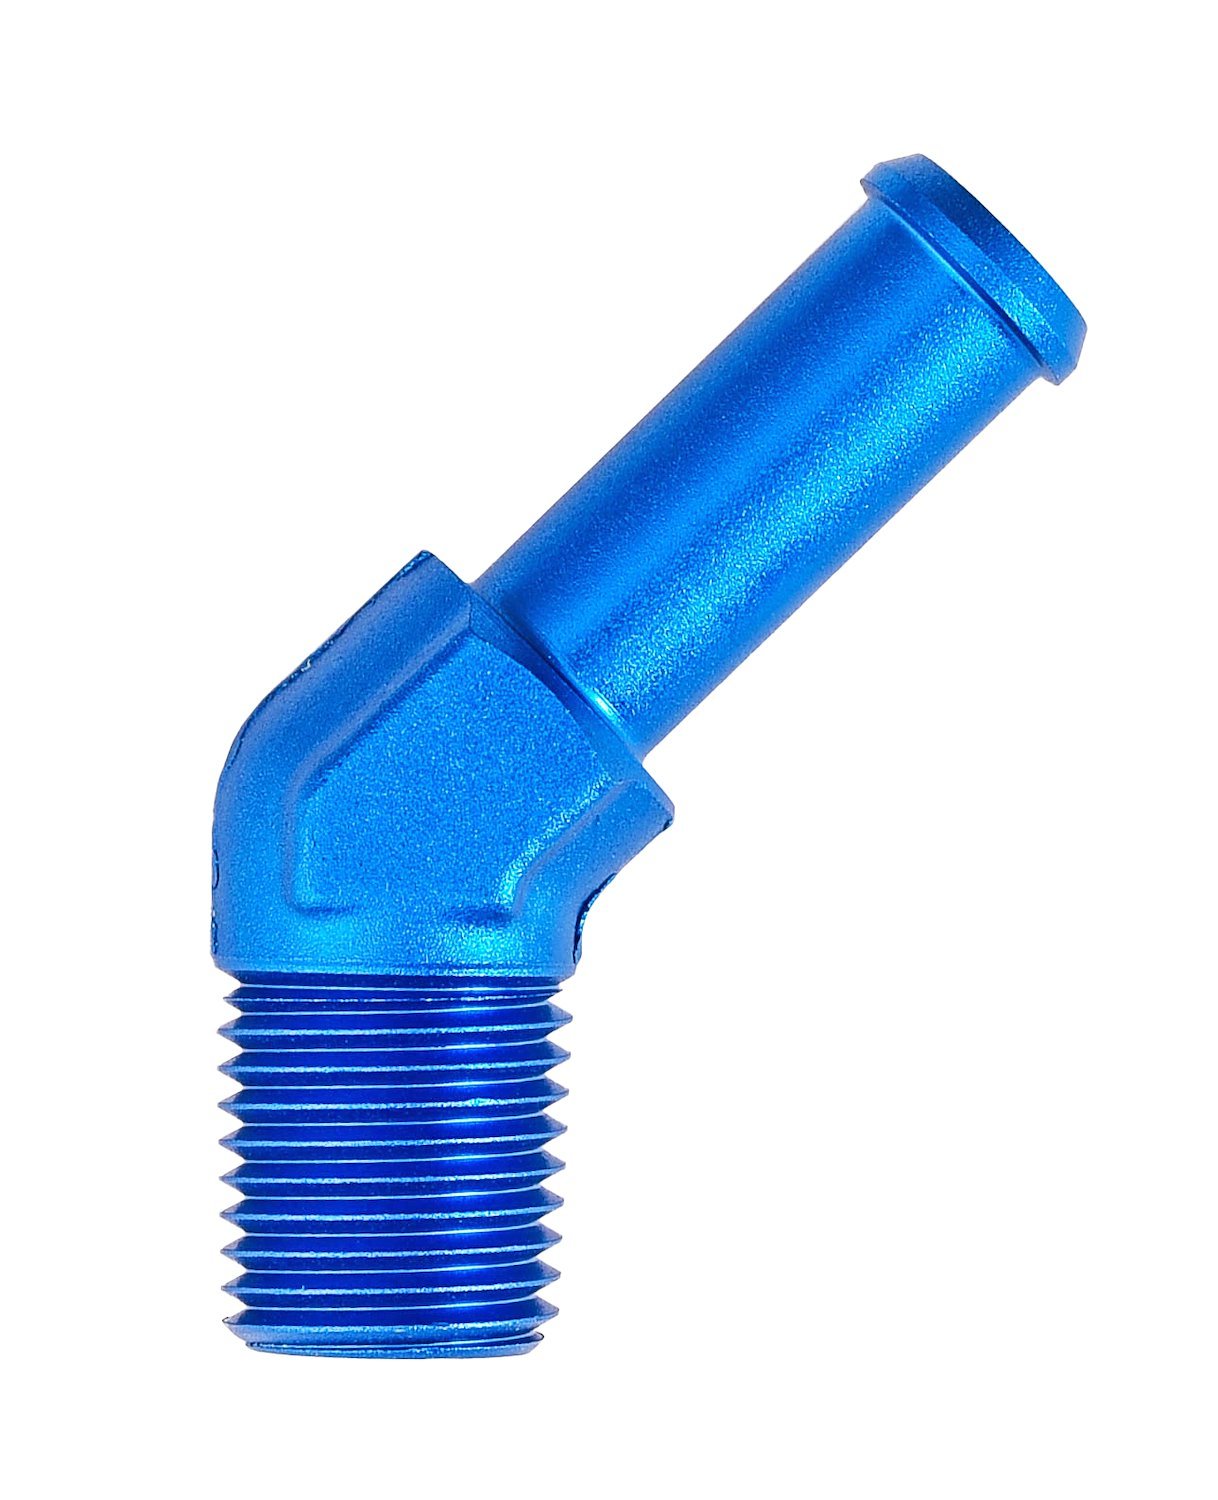 NPT to Hose Barb Fitting, 45-Degree [1/4 in. NPT Male to 3/8 in. I.D. Hose, Blue]